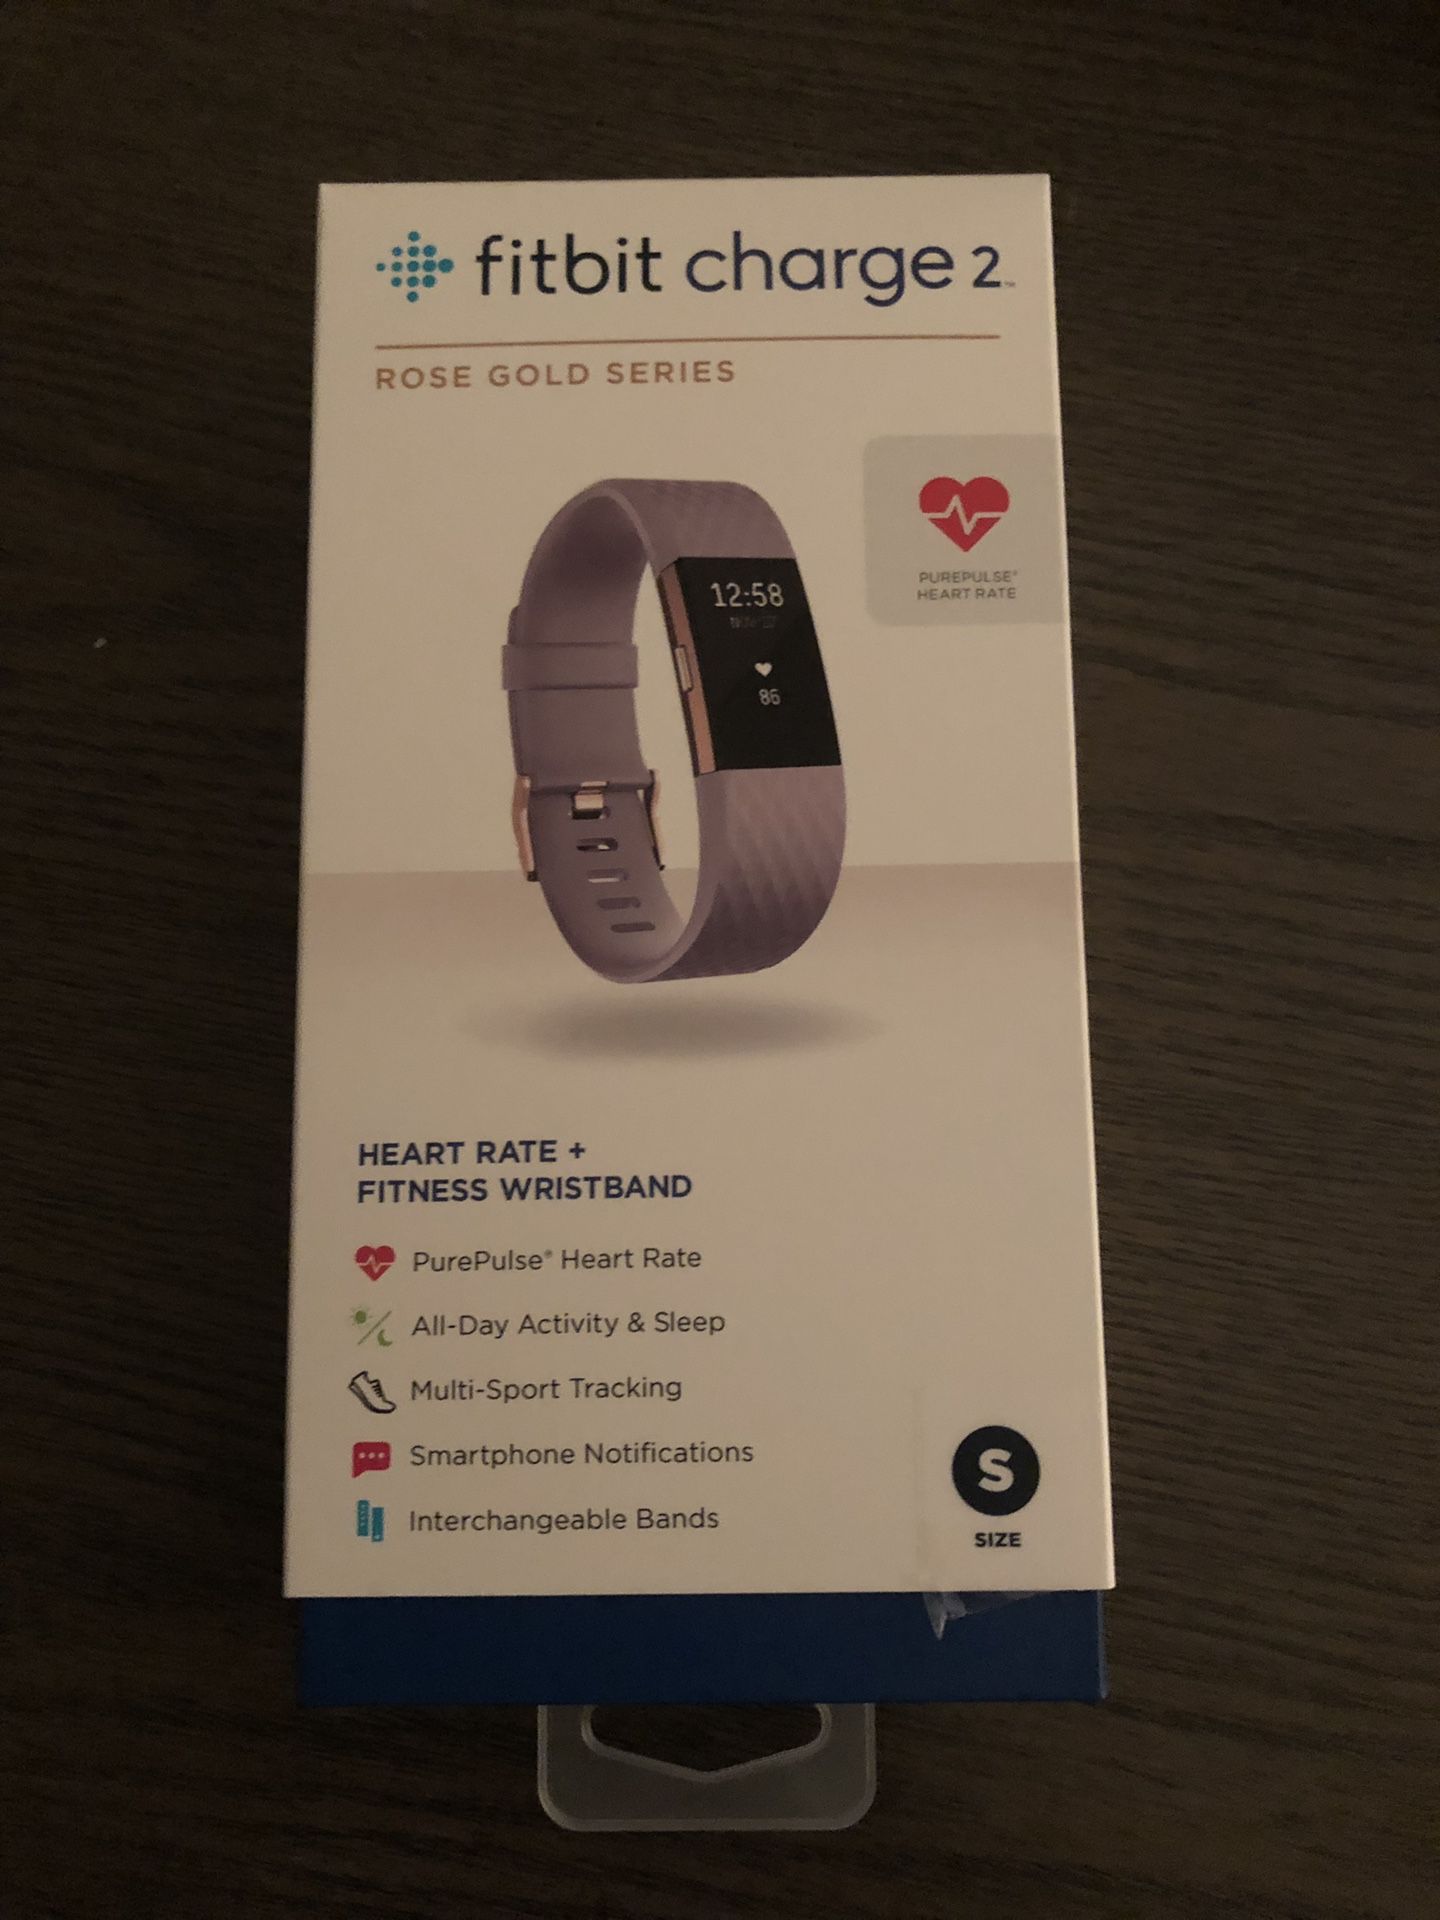 Fitbit charge 2 Rose Gold Series New in box